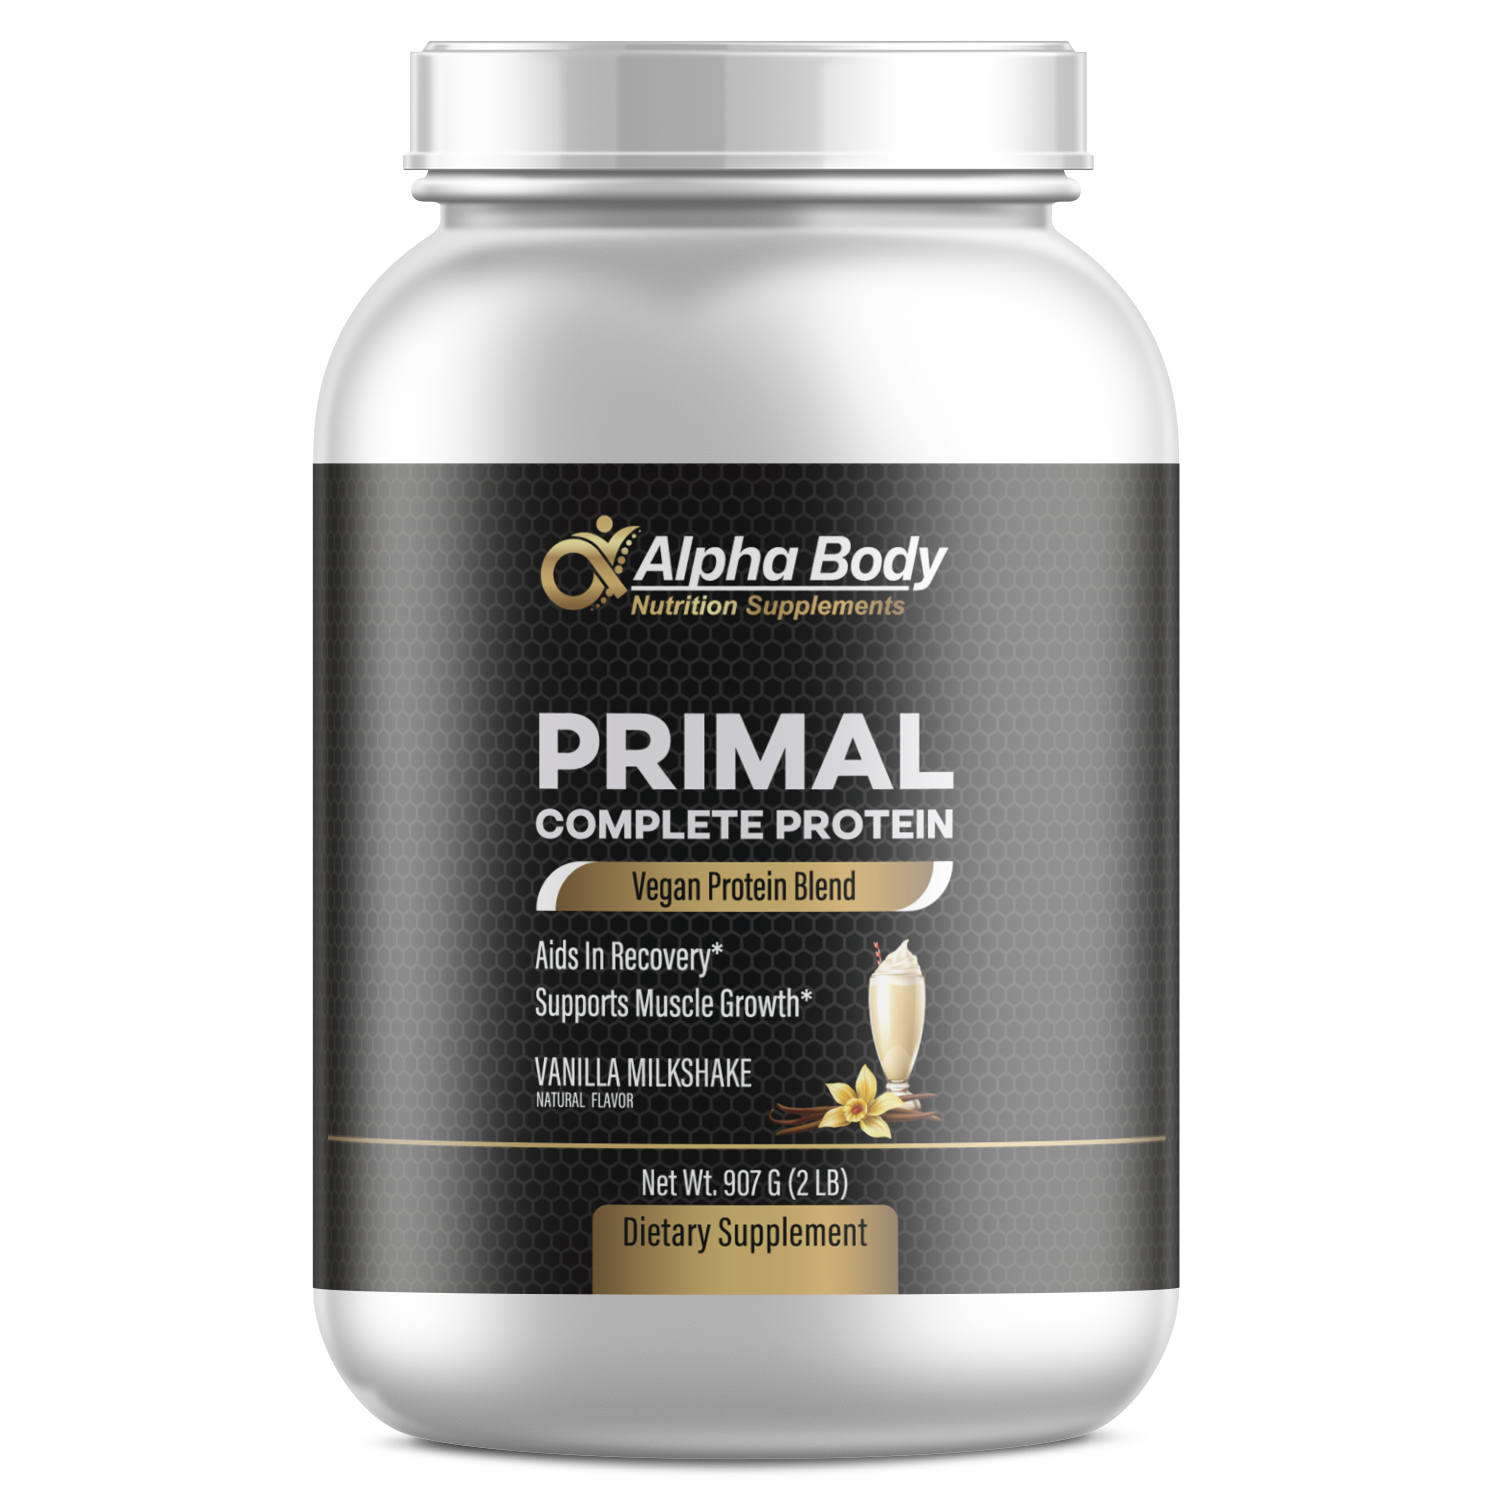 PRIMAL COMPLETE PROTEIN